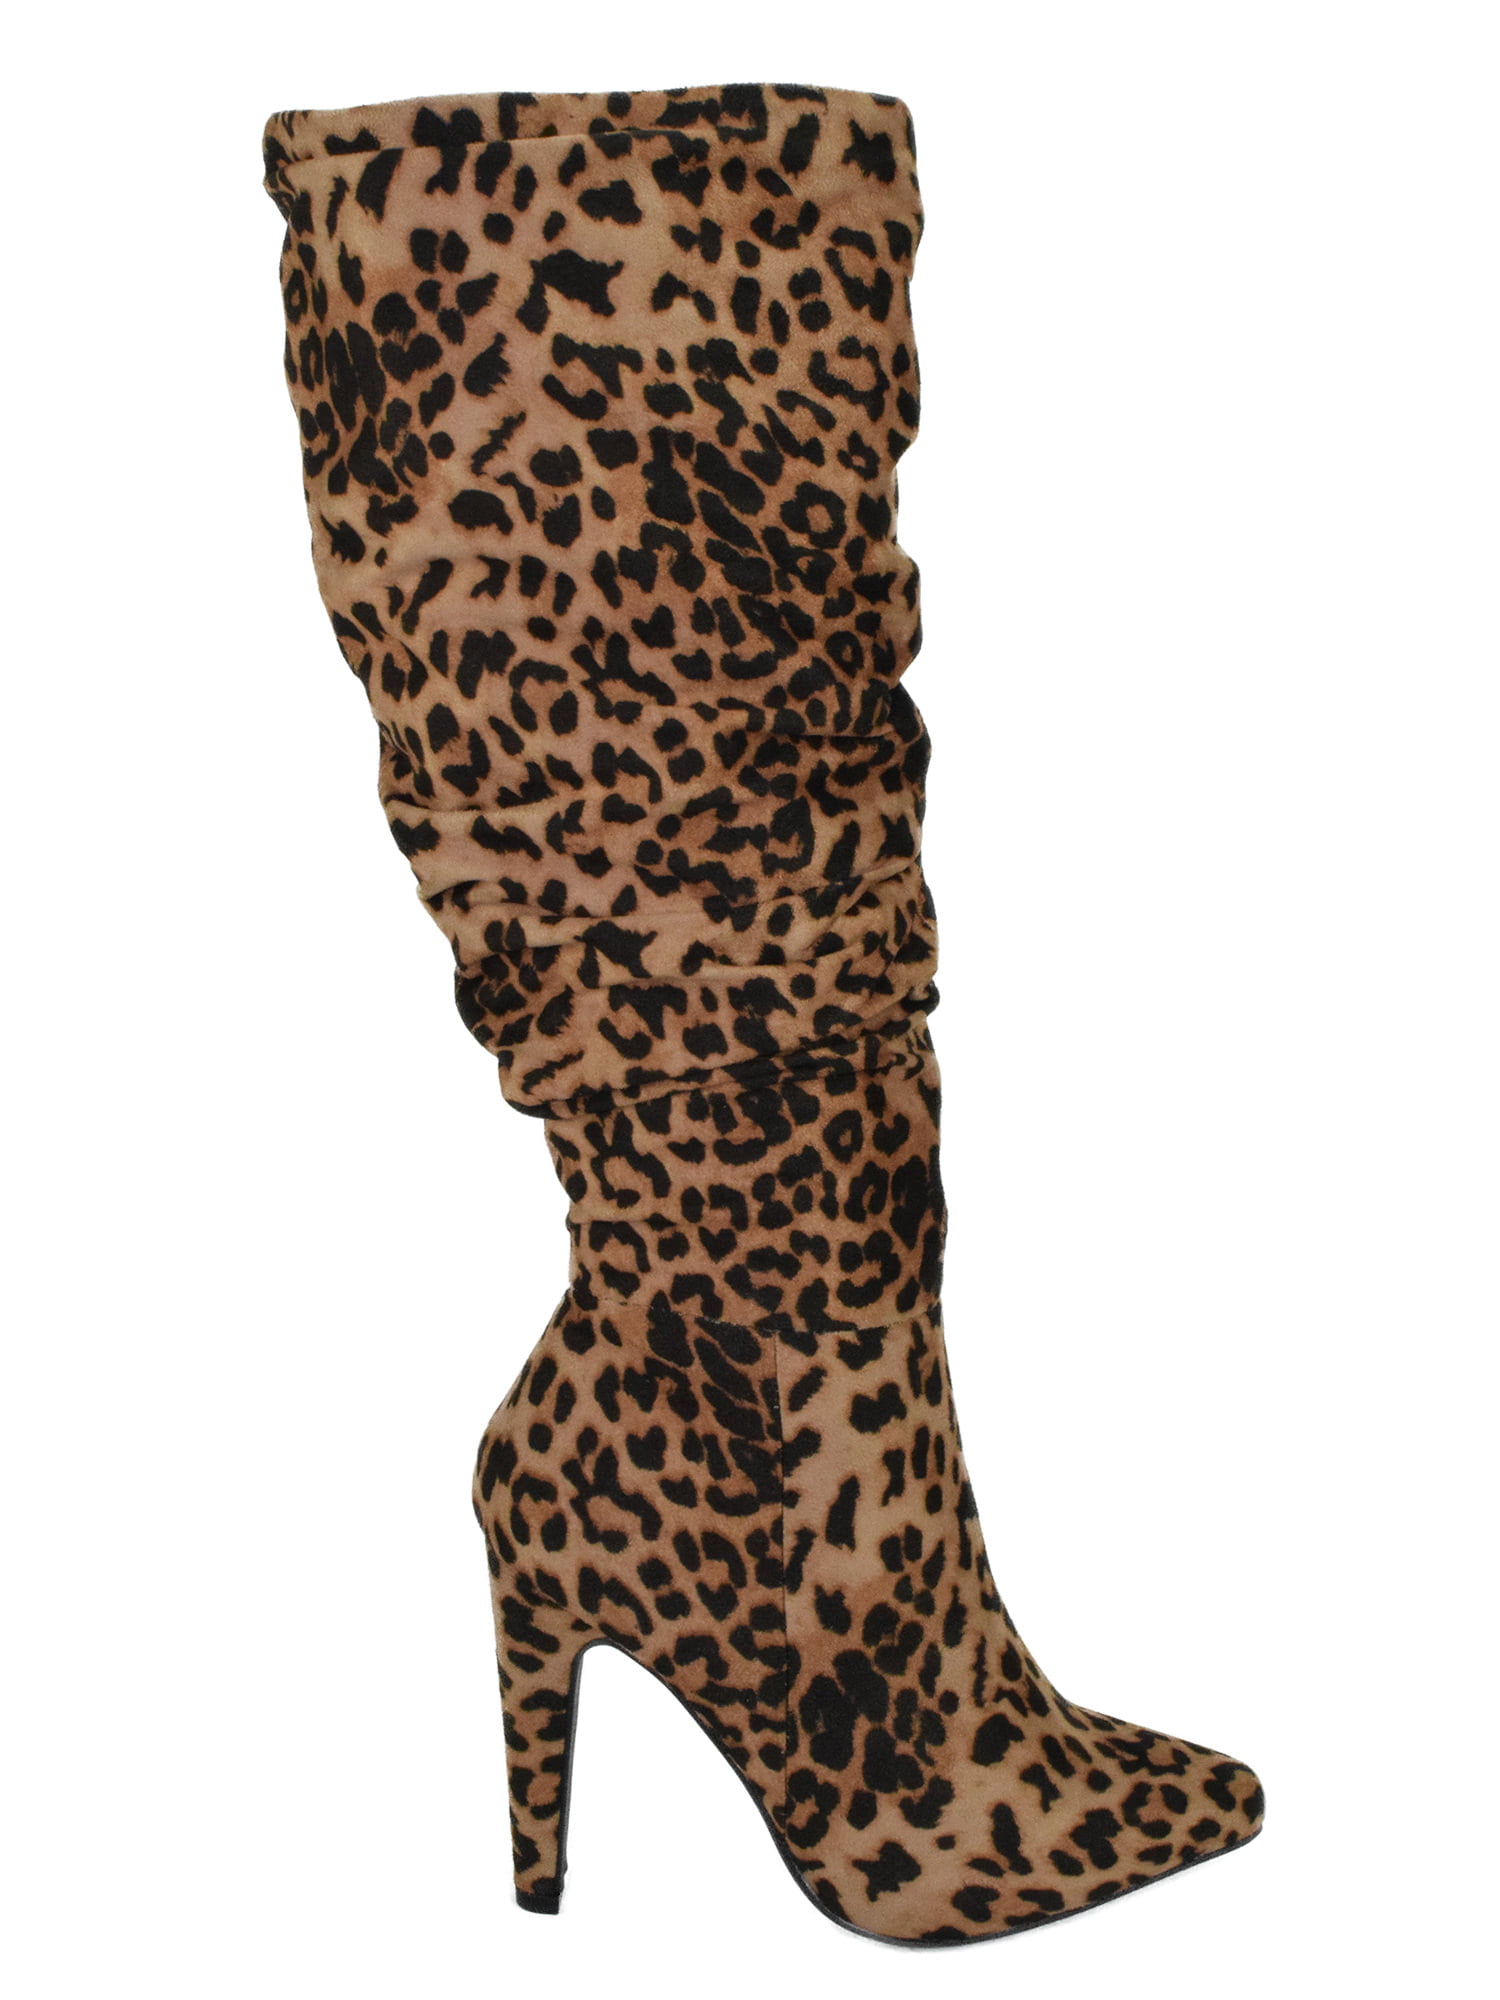 EVERY Cheetah Leopard Print Suede 